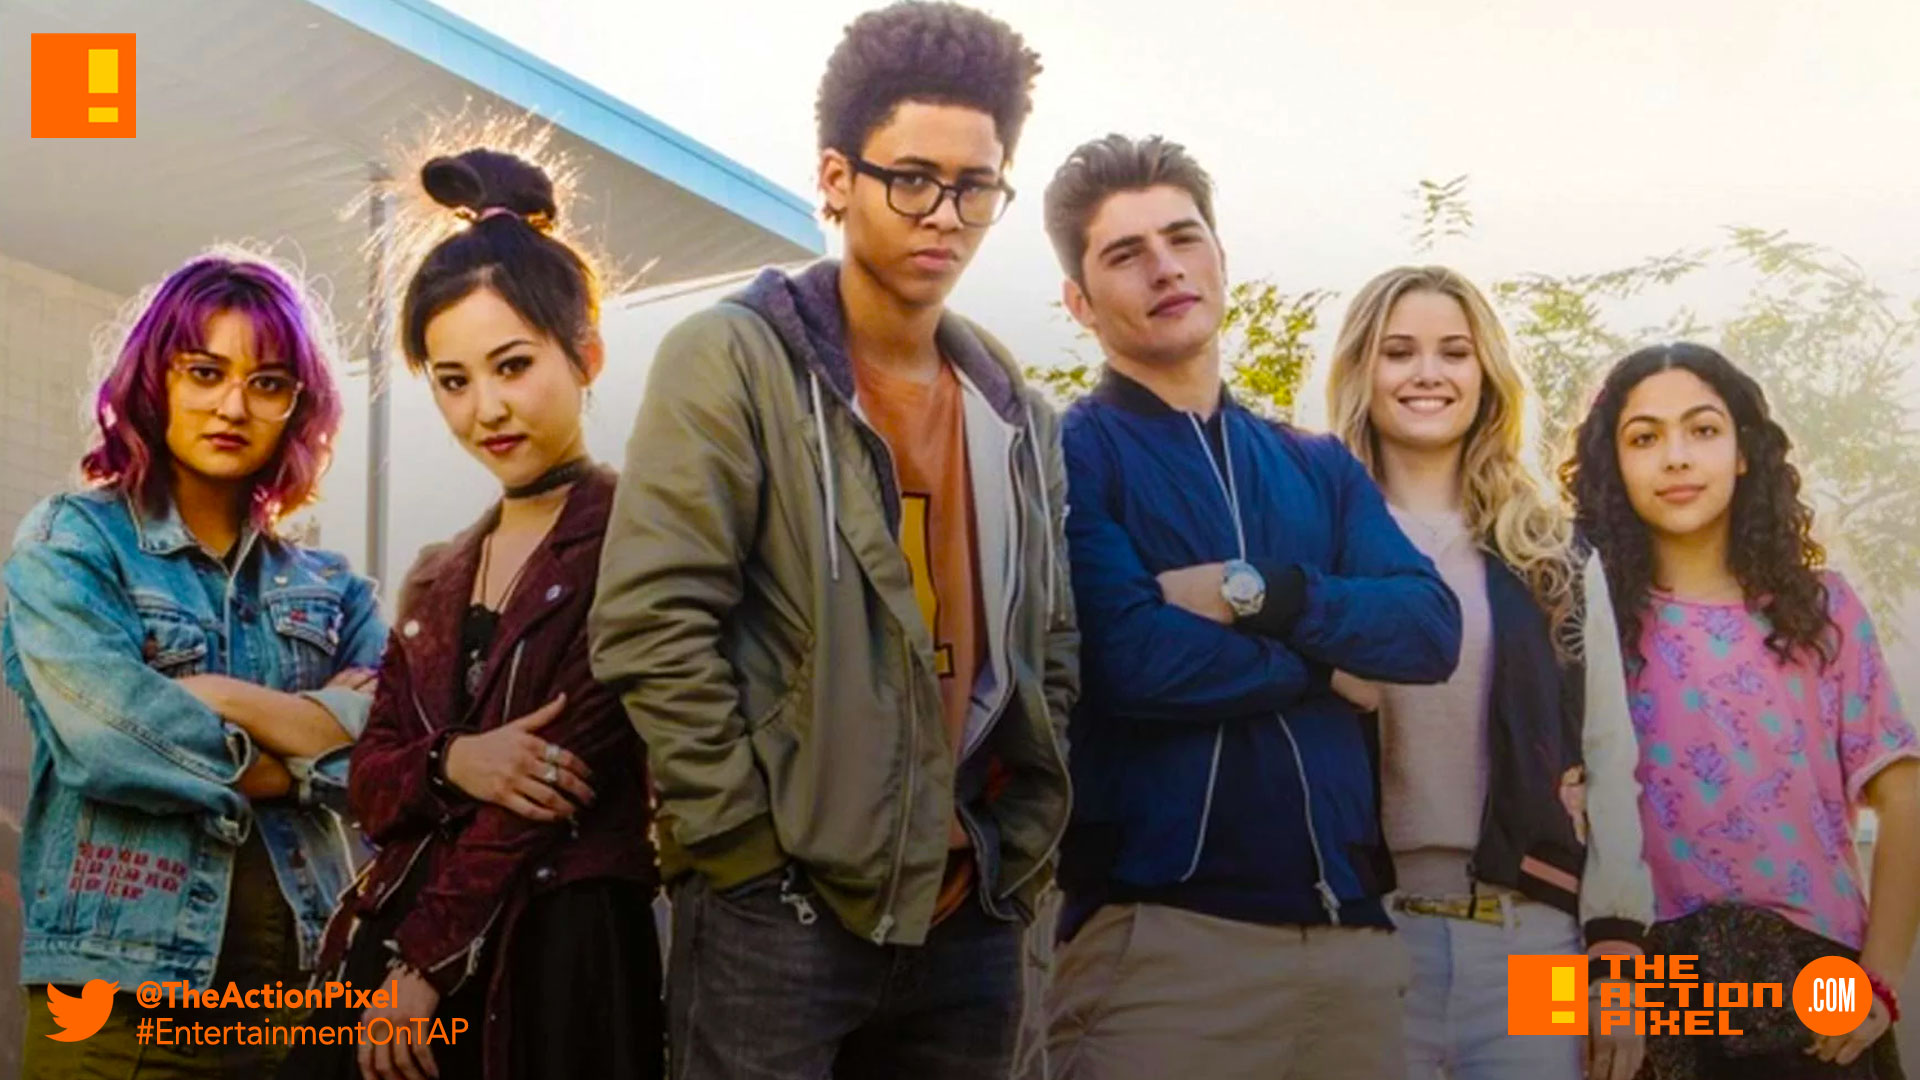 Marvel's Runaways” gives us first look image of the coming Hulu film series